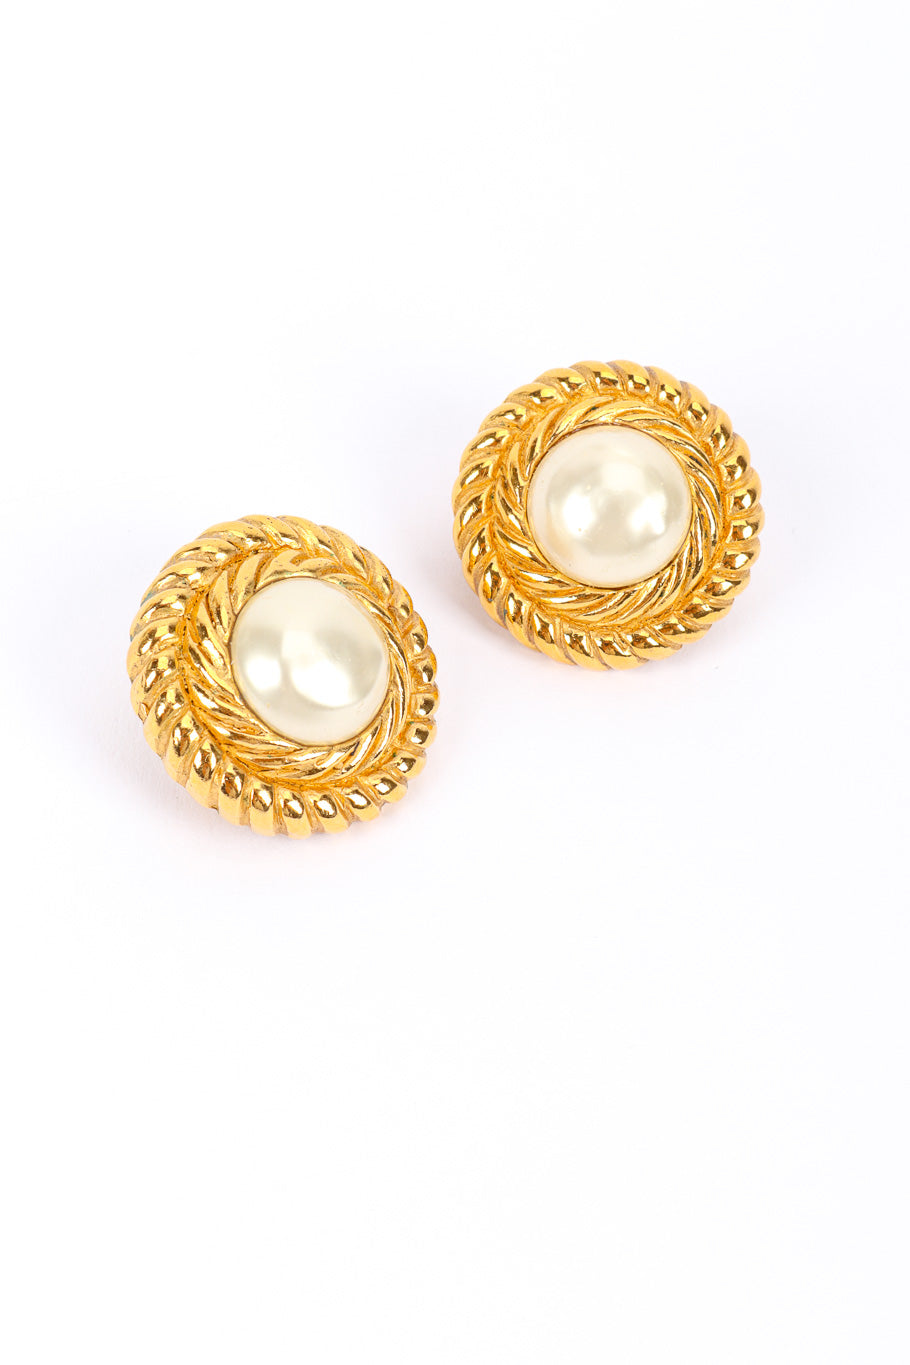 Rope Frame Pearl Earrings by Chanel on white background @recessla